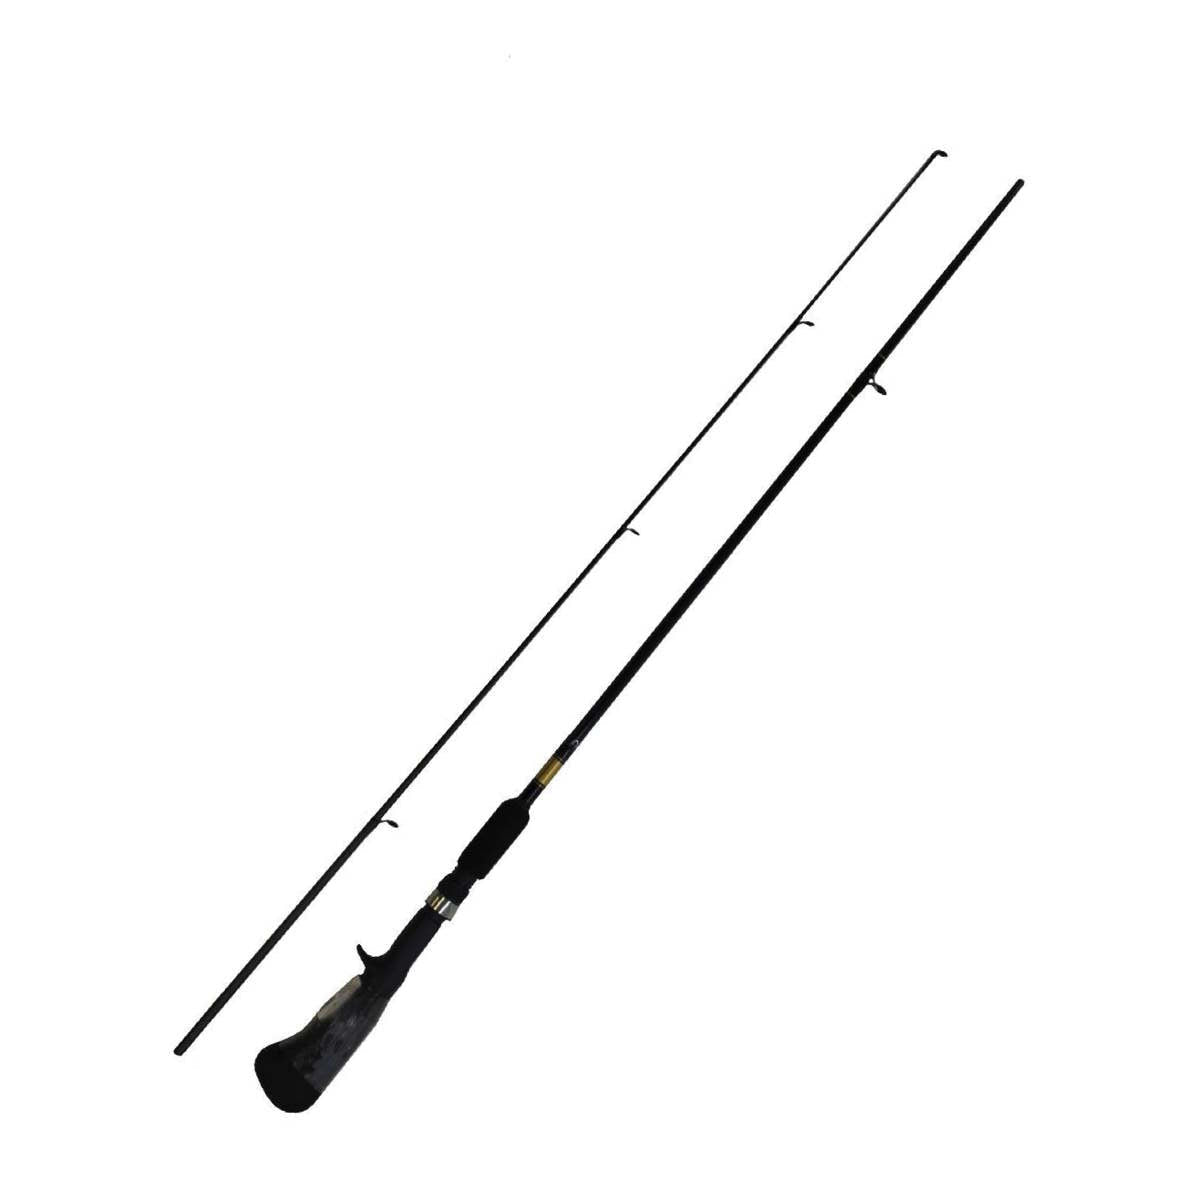 Photo of Daiwa Sweepfire-D Pistol Grip Casting Rod for sale at United Tackle Shops.